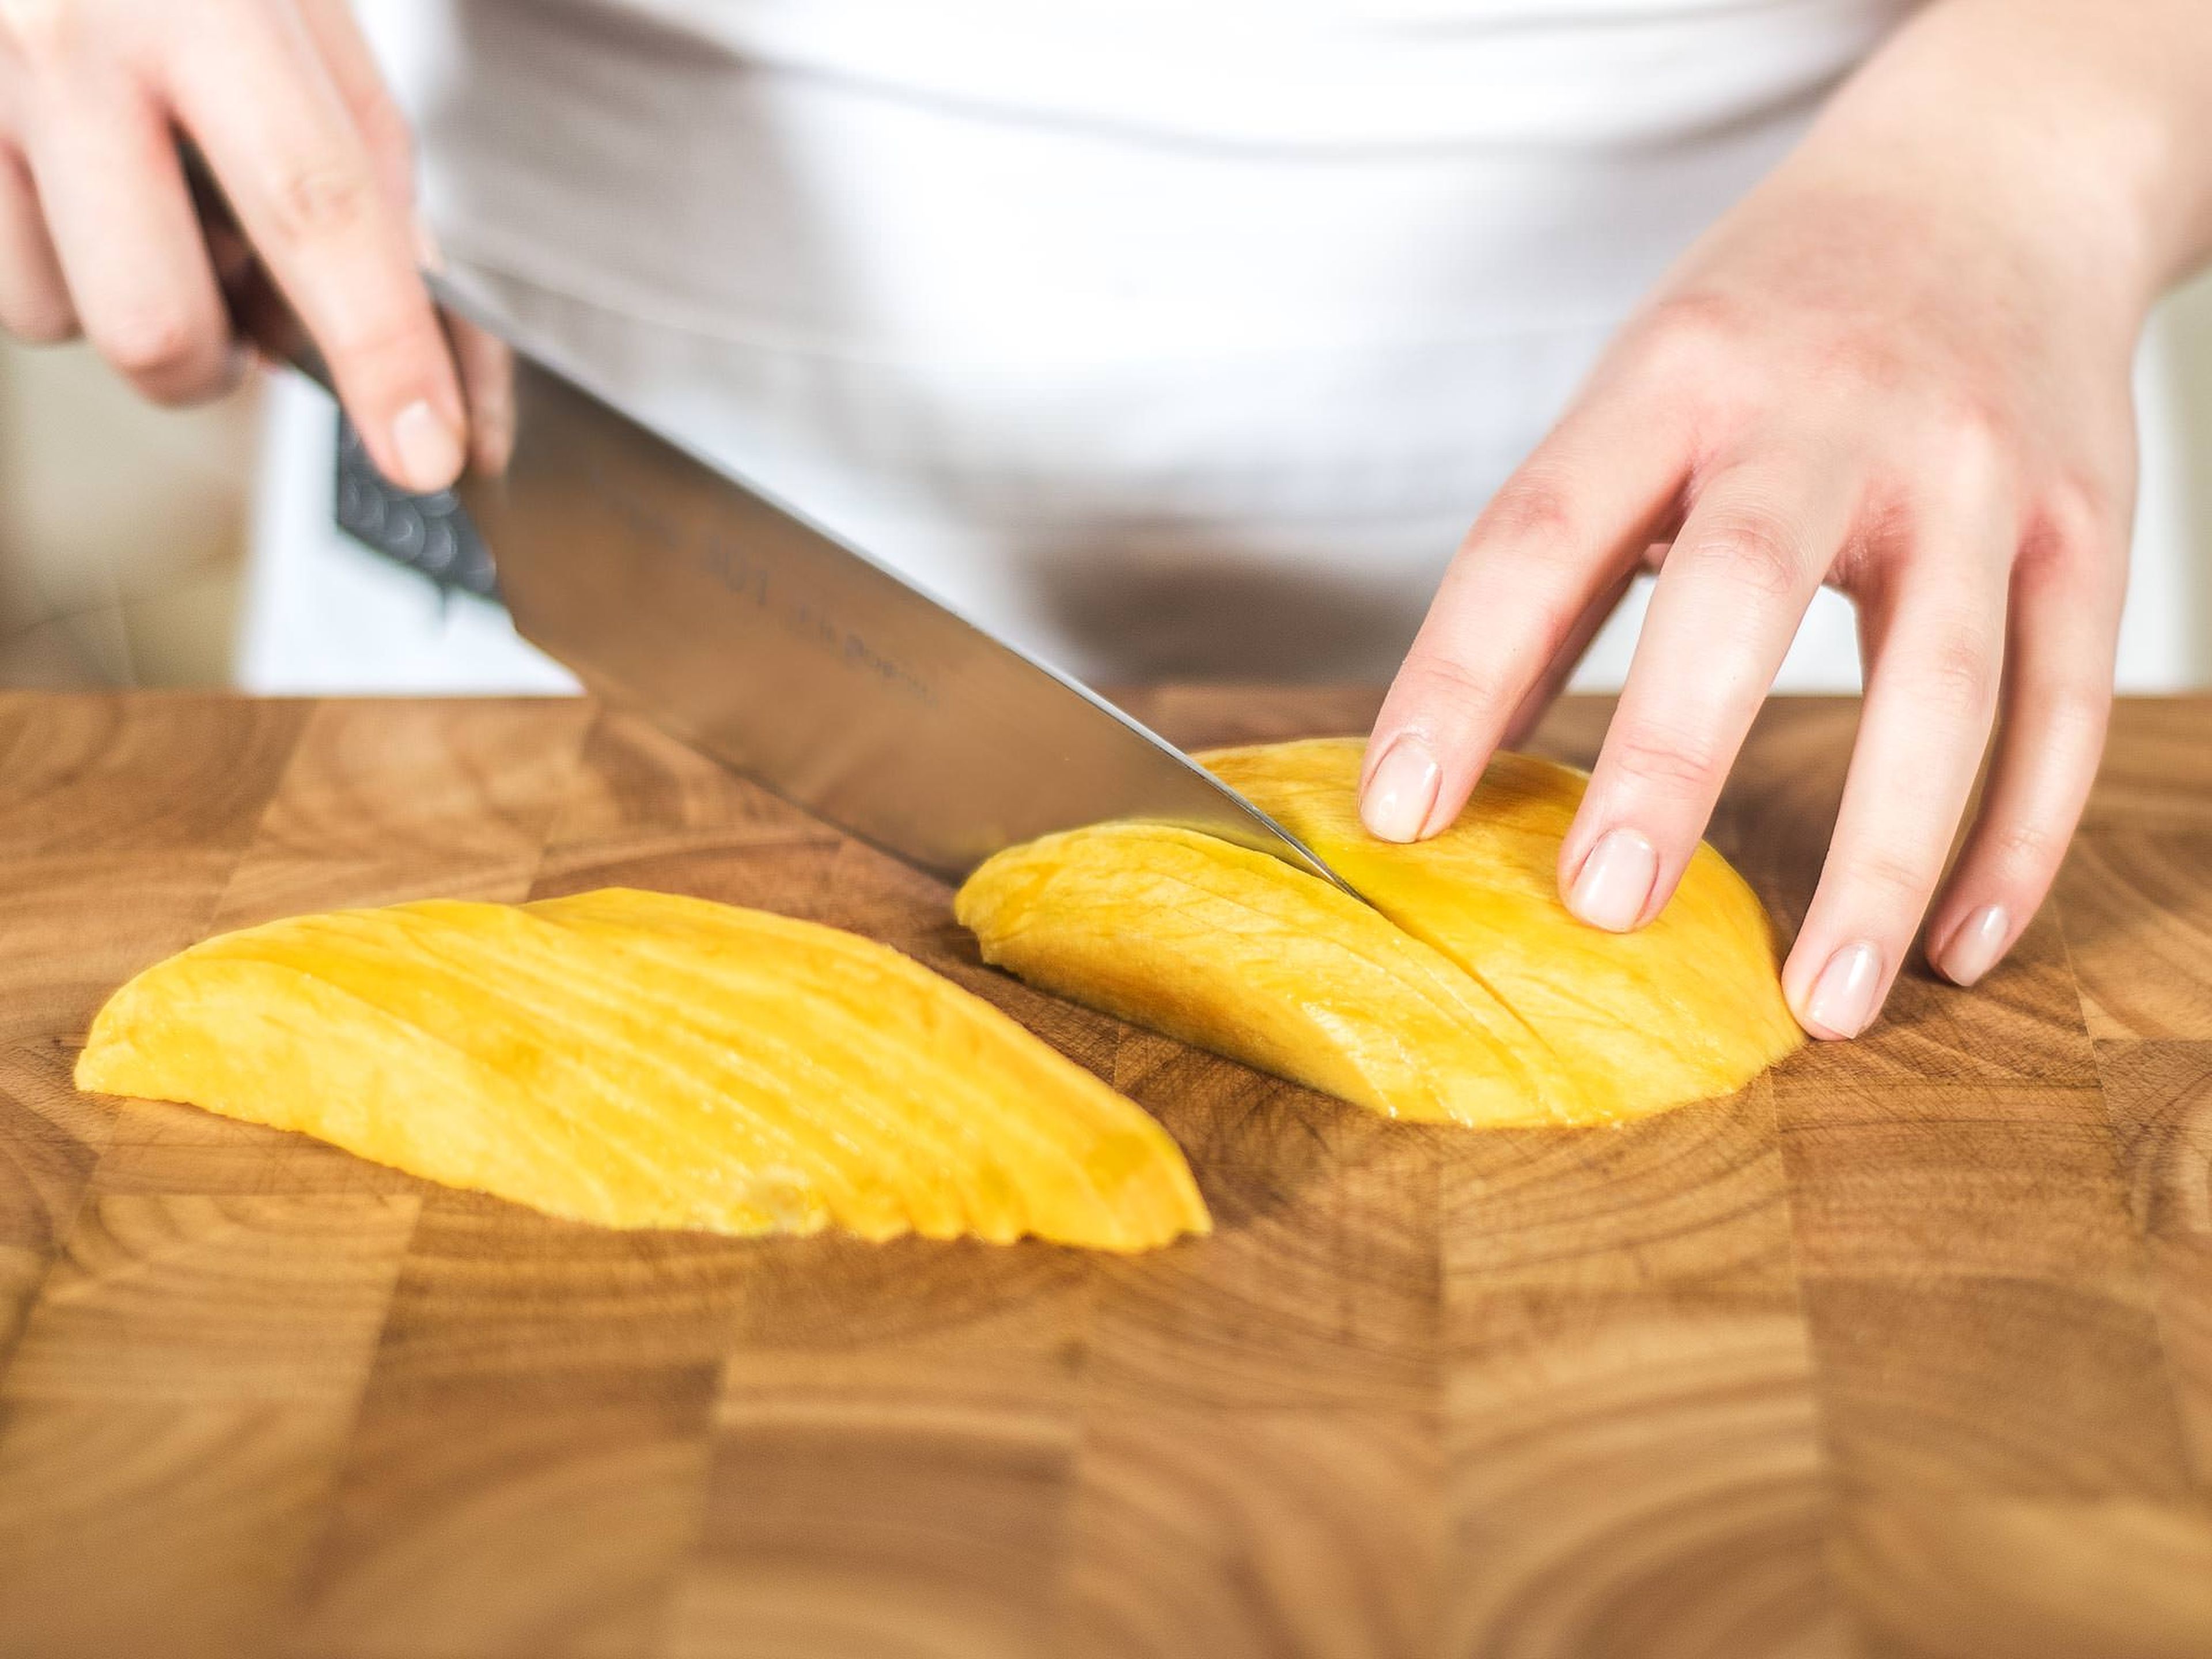 Now, peel the mango and carefully cut the flesh from the stone. Next, slice the two large sides of the fruit into fine strips.